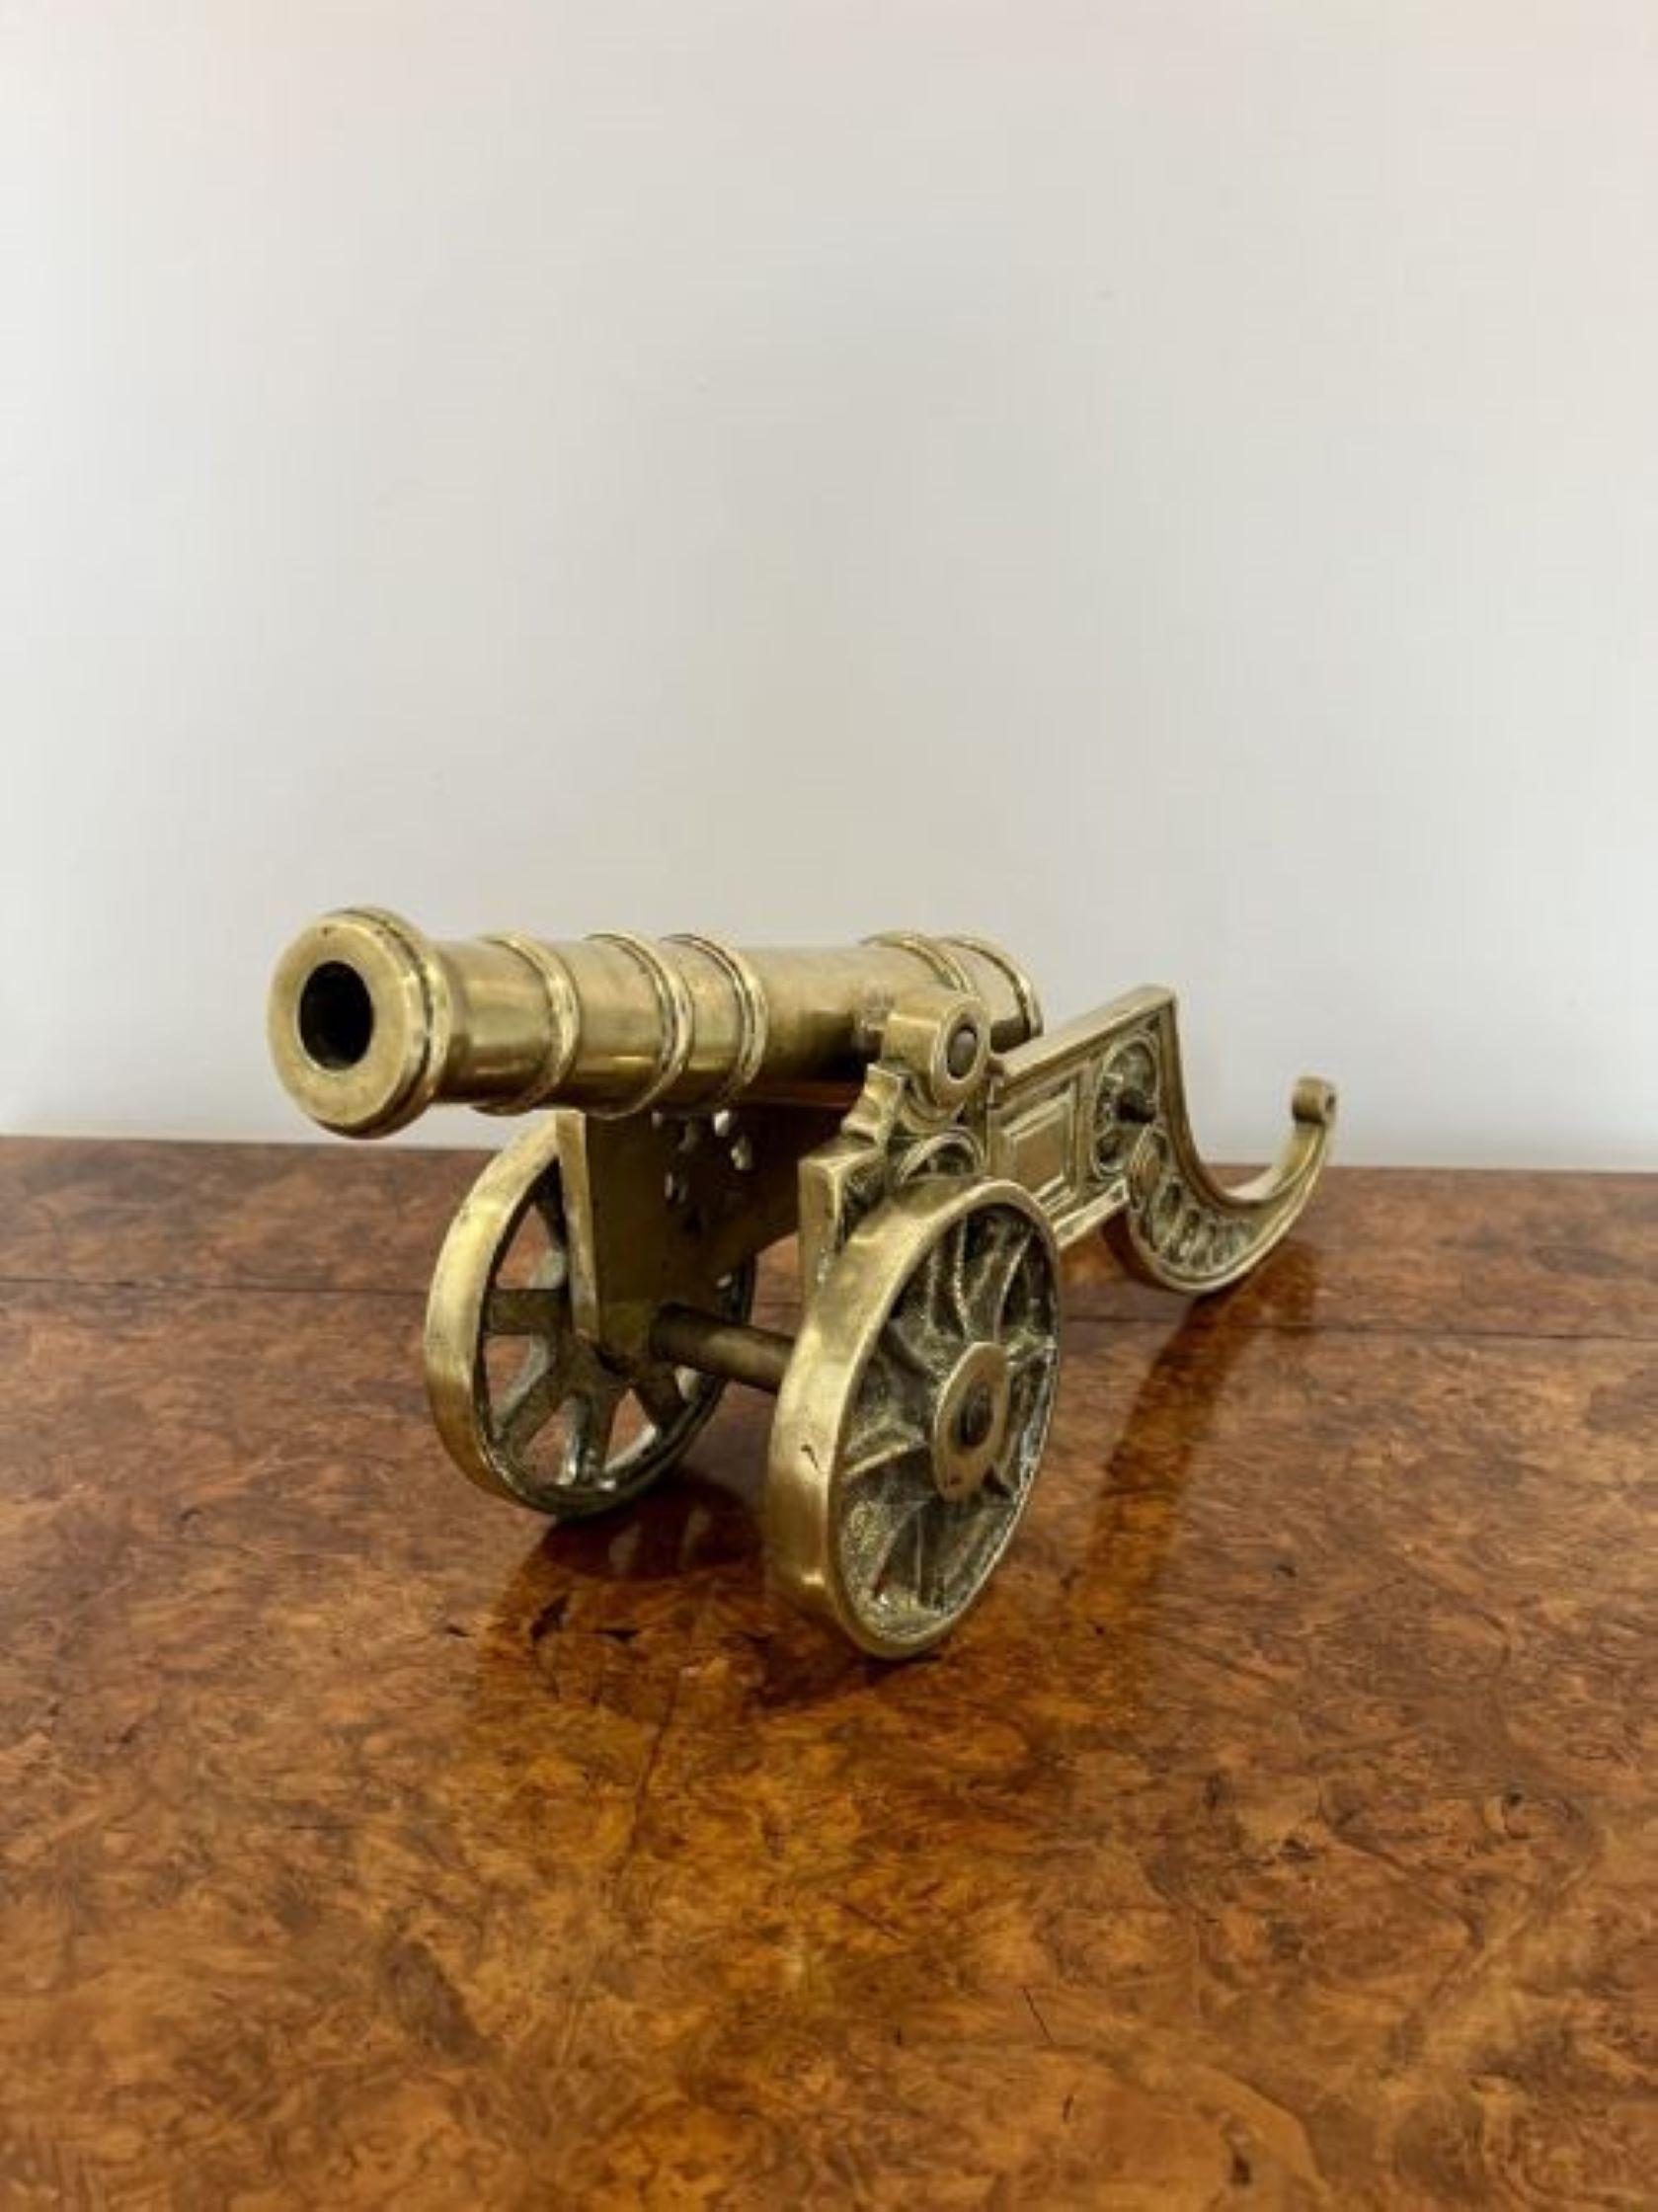 Wonderful large antique Edwardian brass cannon having a wonderful model of a brass cannon with lovely decoration, movable wheels and cannon. 